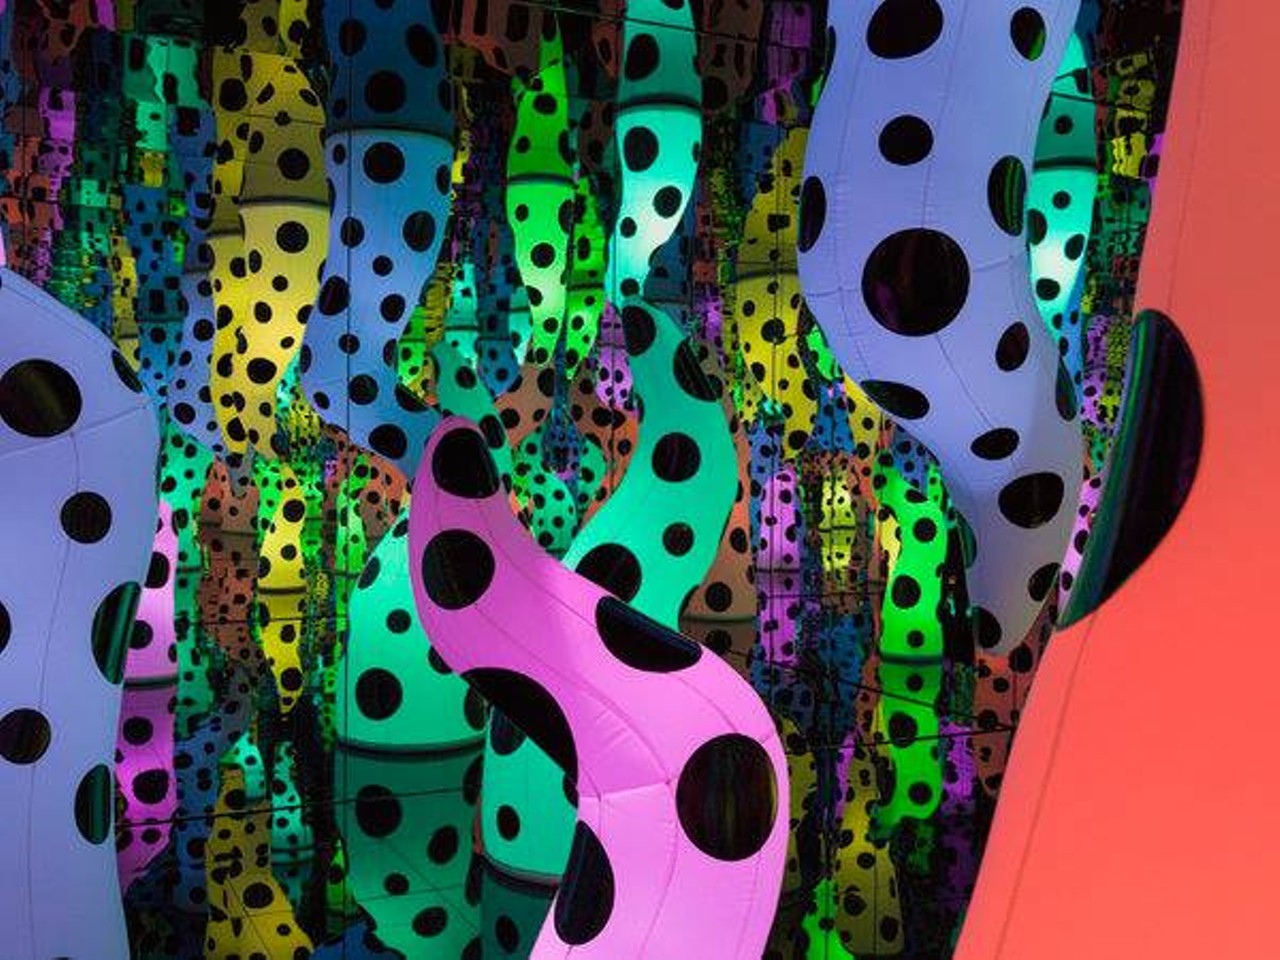 Talk about love at the Tampa Museum of ArtLove is calling. It says you should visit the Tampa Museum of Art this Valentine's Day. Museum curator, Joanna Robotham, is giving a 30 minute talk on the love theme in Yayoi Kusama&#146;s works. Also, this is your last chance to see Kusama's Love is Calling.Thurs., Feb. 14
Photo via the Facebook event page